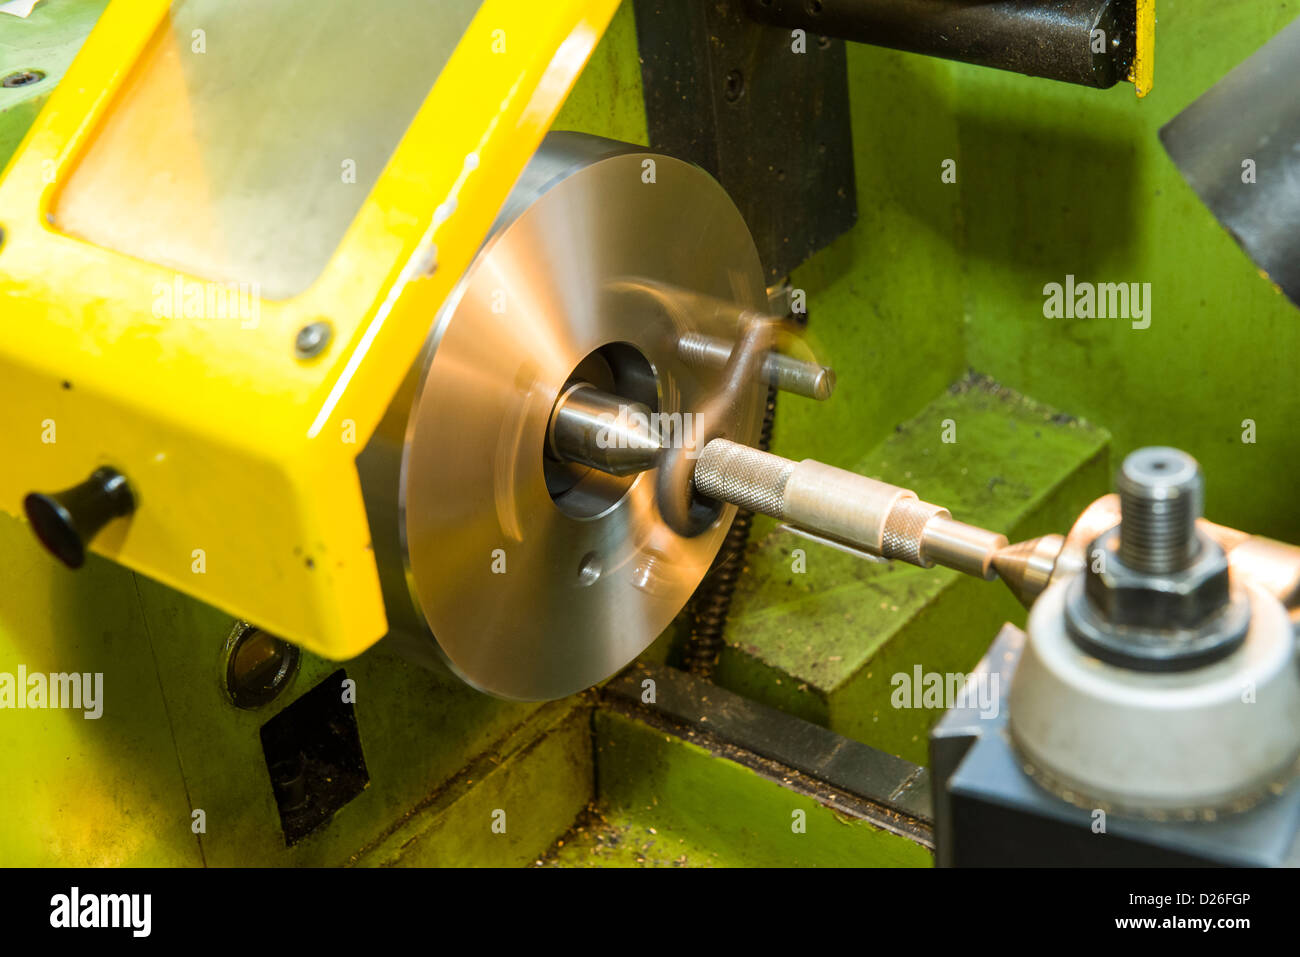 A go-no-go gauge being turned on an industrial metal turning lathe between centres using a face plate and drive dog. Stock Photo